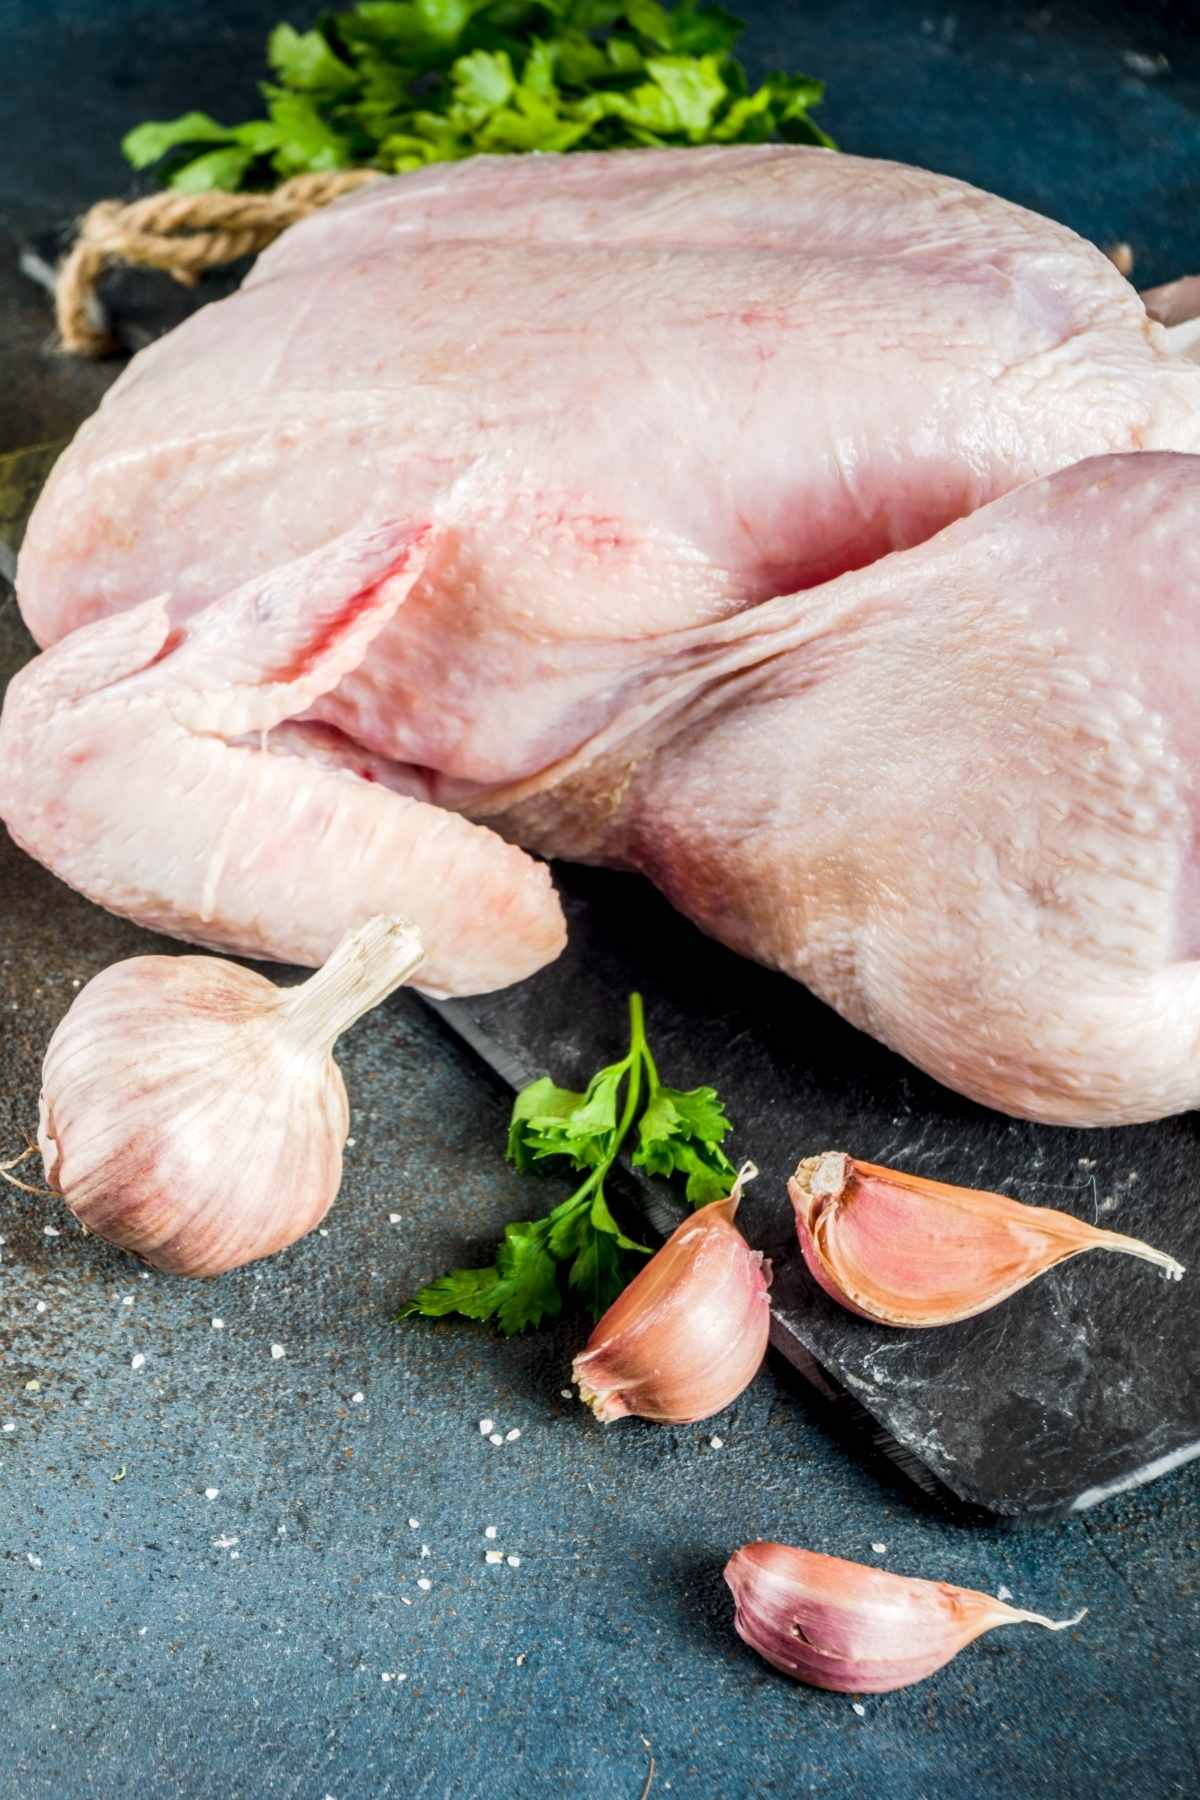 If you’re wondering how long frozen chicken can be left at room temperature, you’re not alone. It’s a question that many home cooks have wondered about.